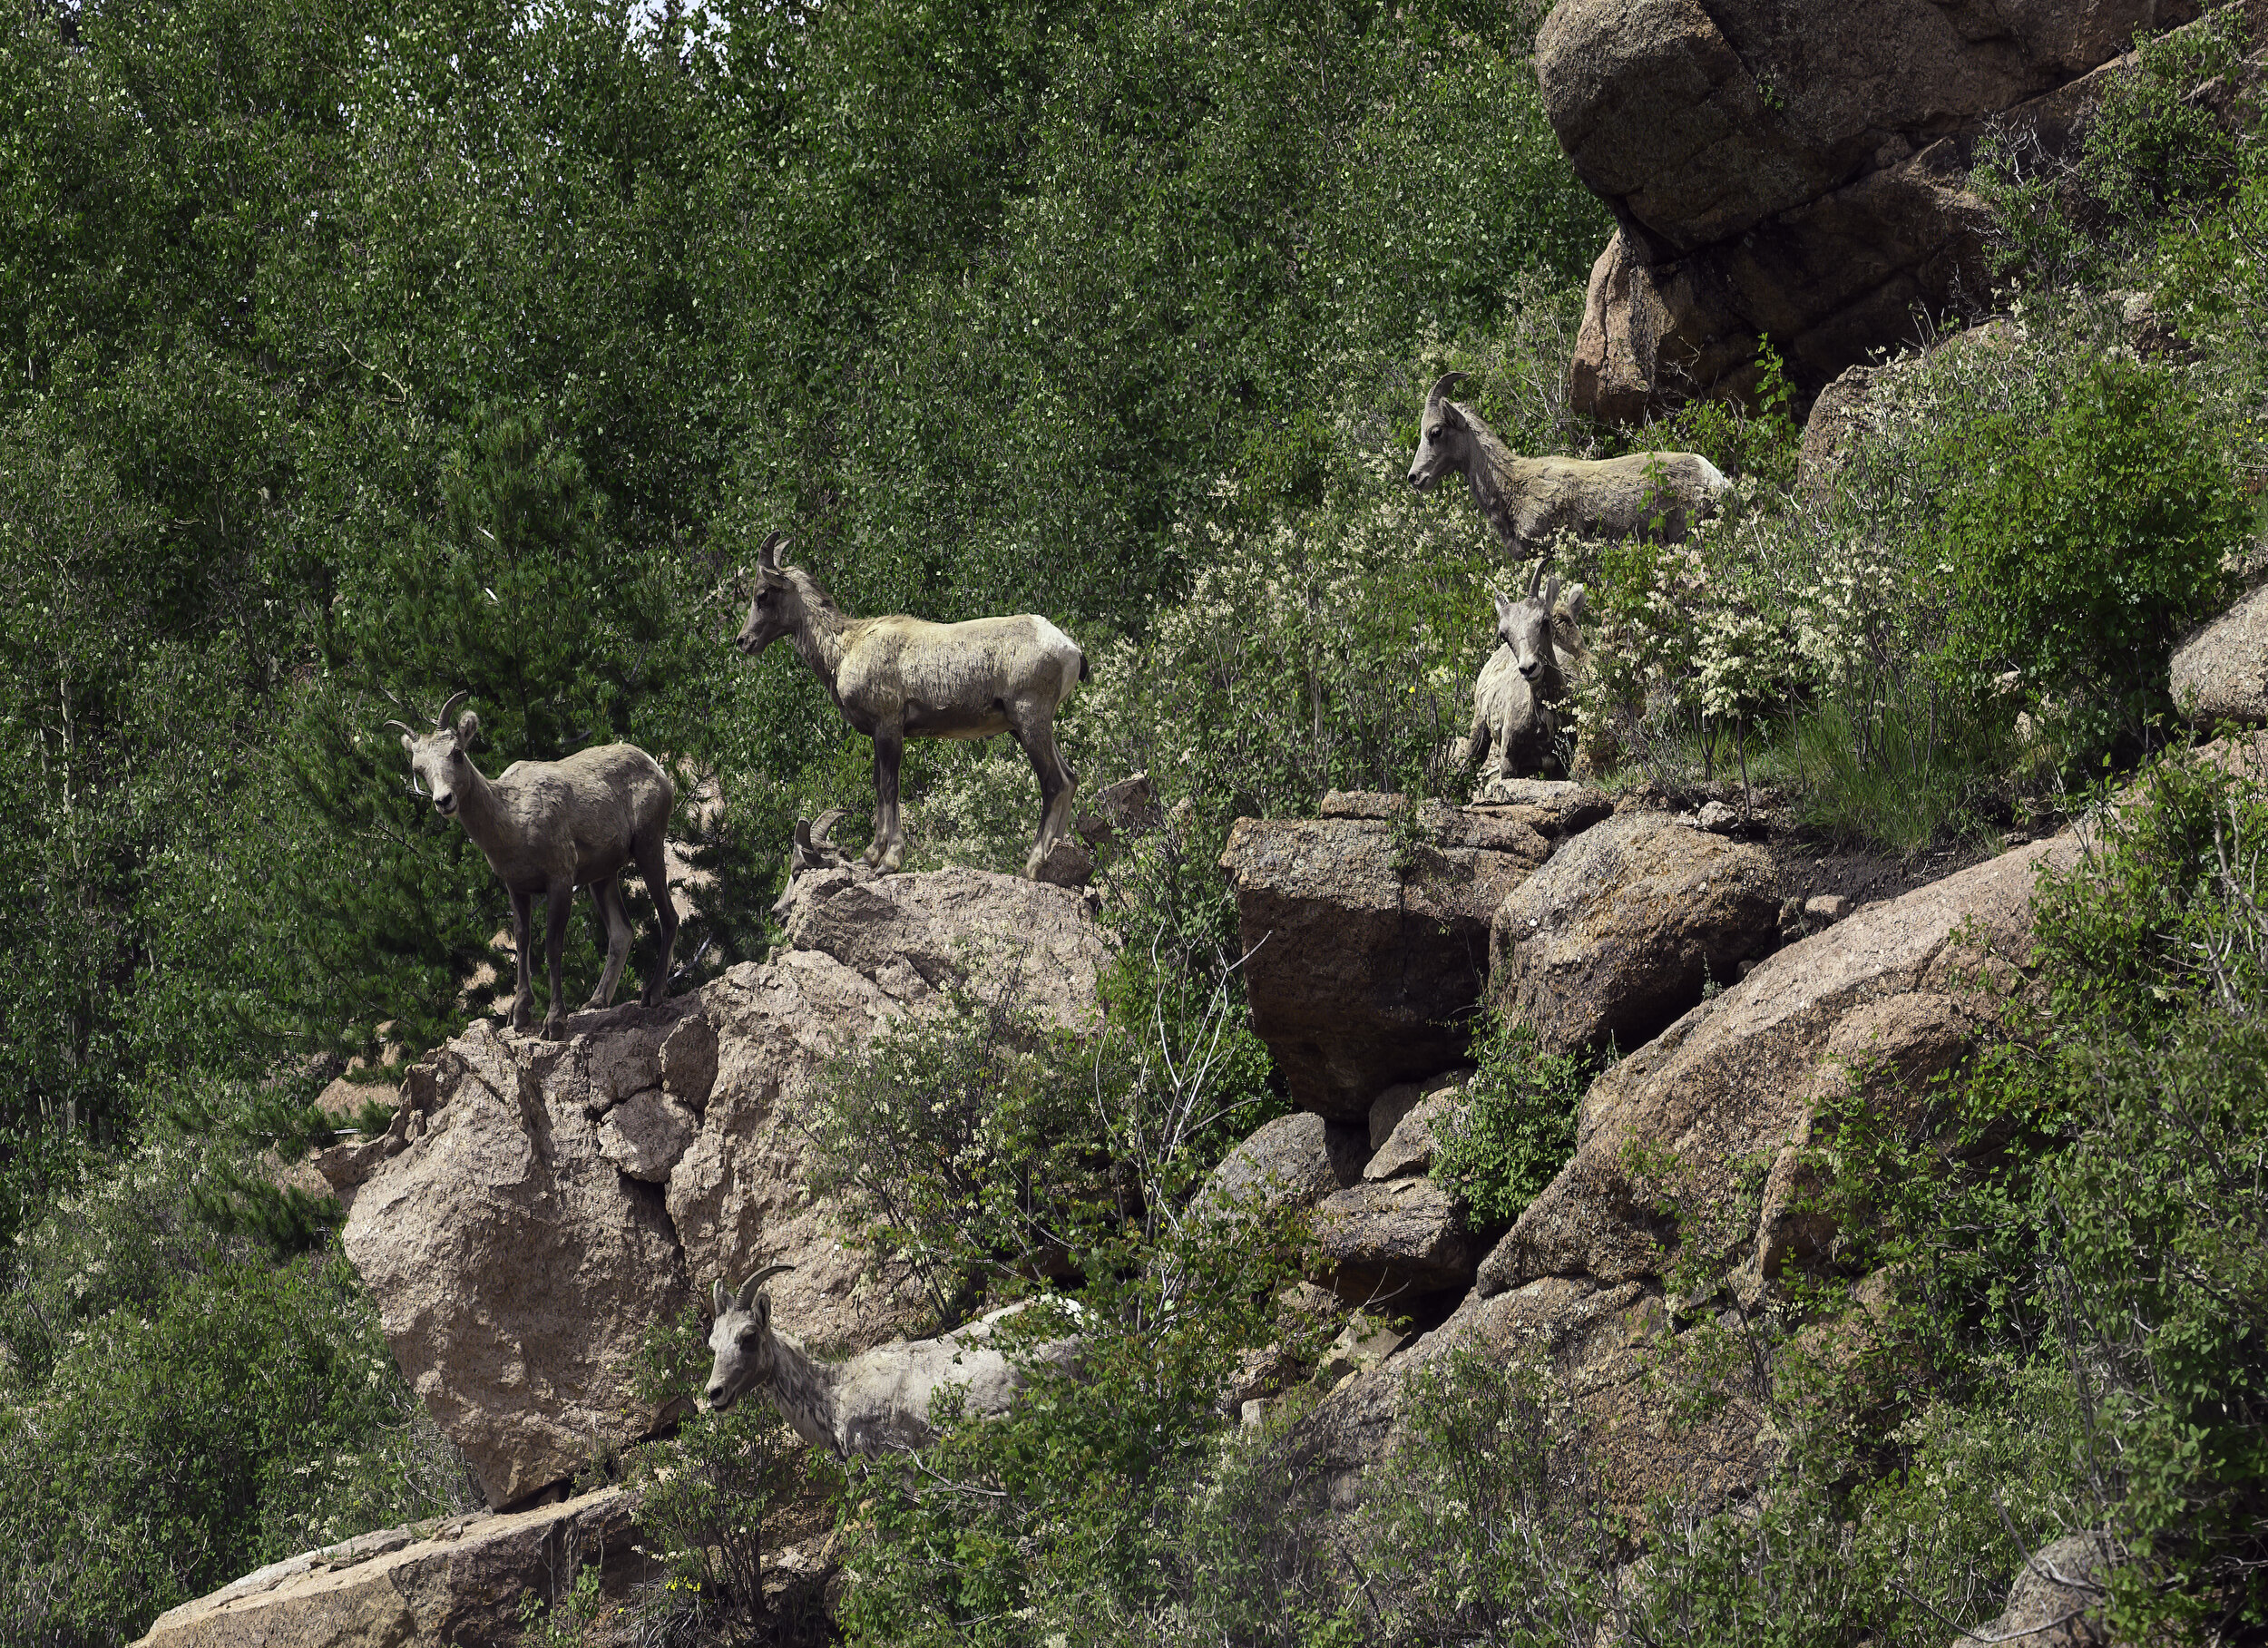 PICTURED: Goats are a serial-invasive animal, capable of decimating entire island ecosystems. They are hard to stop because they are very resilient, can climb steep mountains, and eat practically any plant.